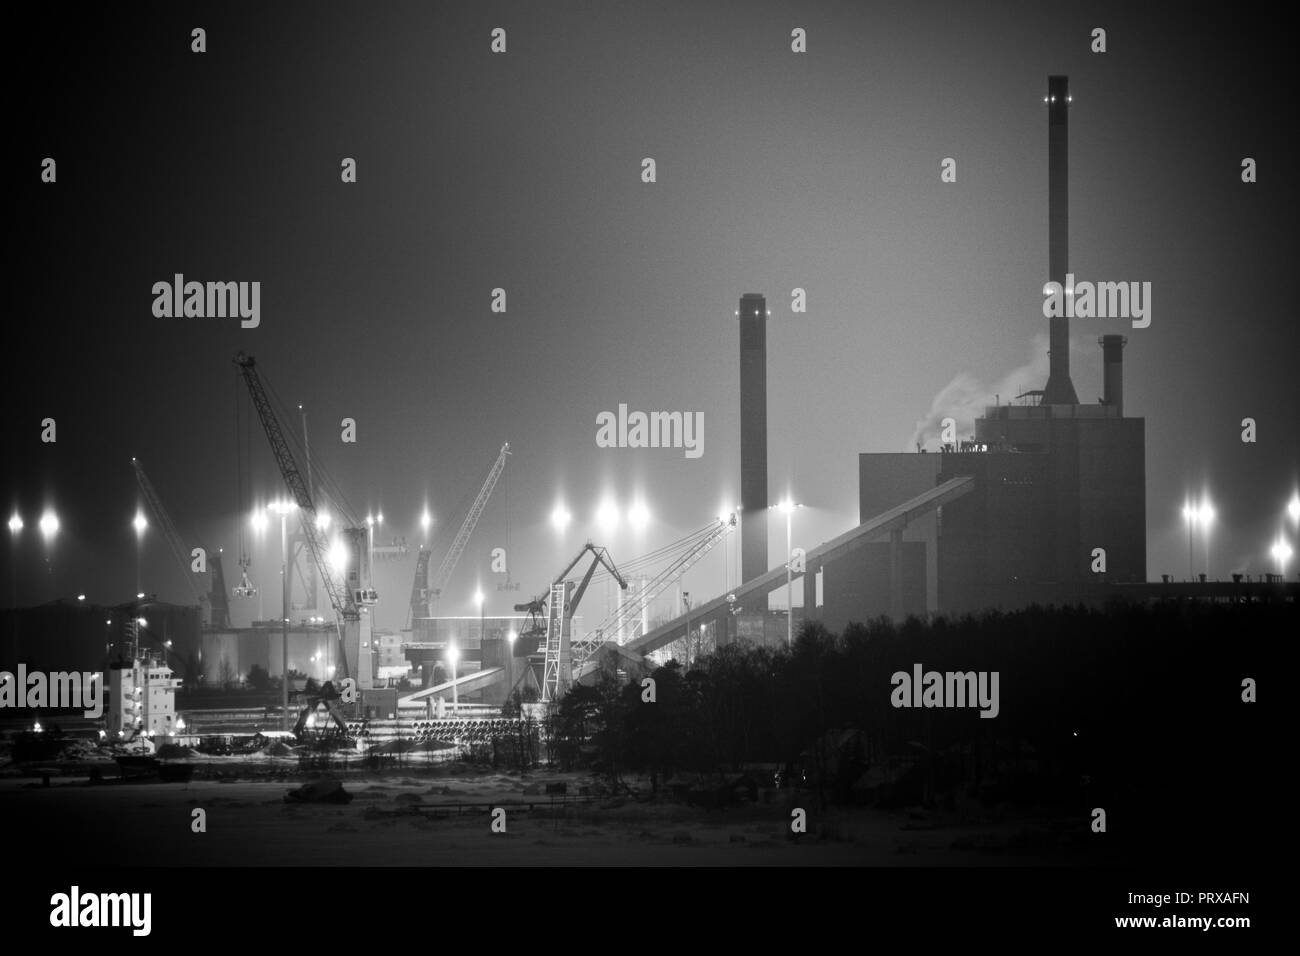 Silhouettes of power plant, chimneys and port cranes on a winter night Stock Photo